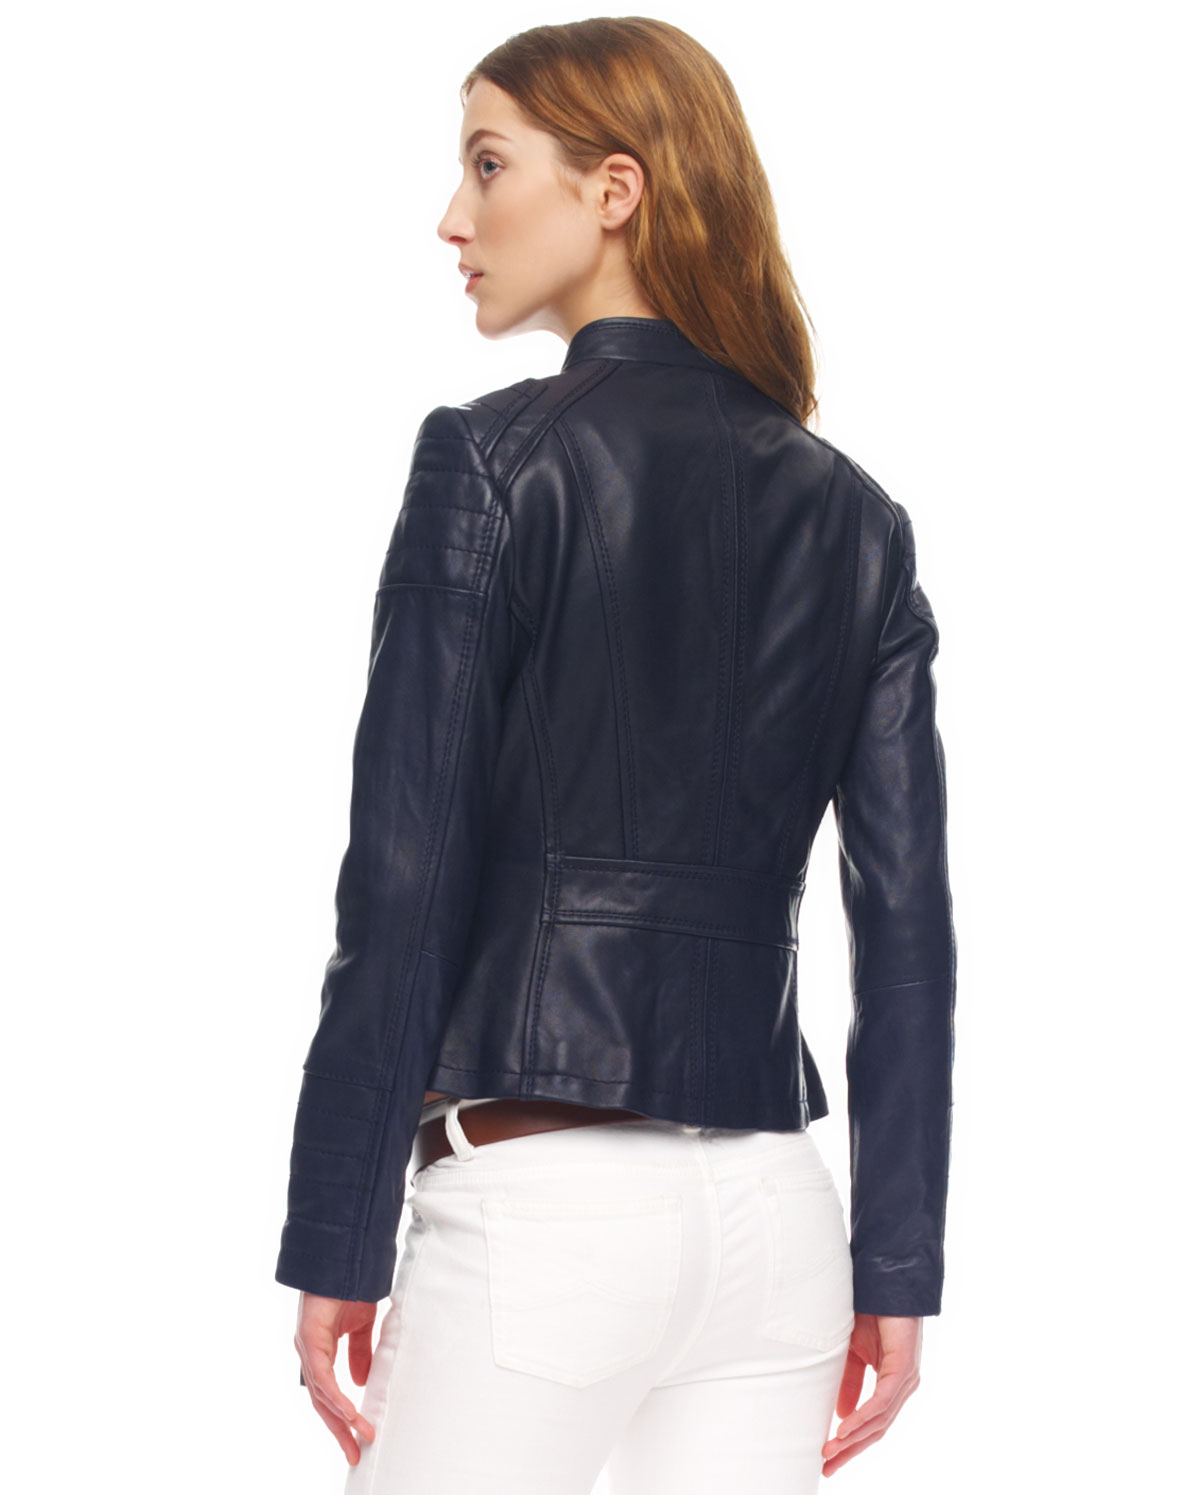 Michael Kors Leather Motorcycle Jacket in Navy (Blue) - Lyst